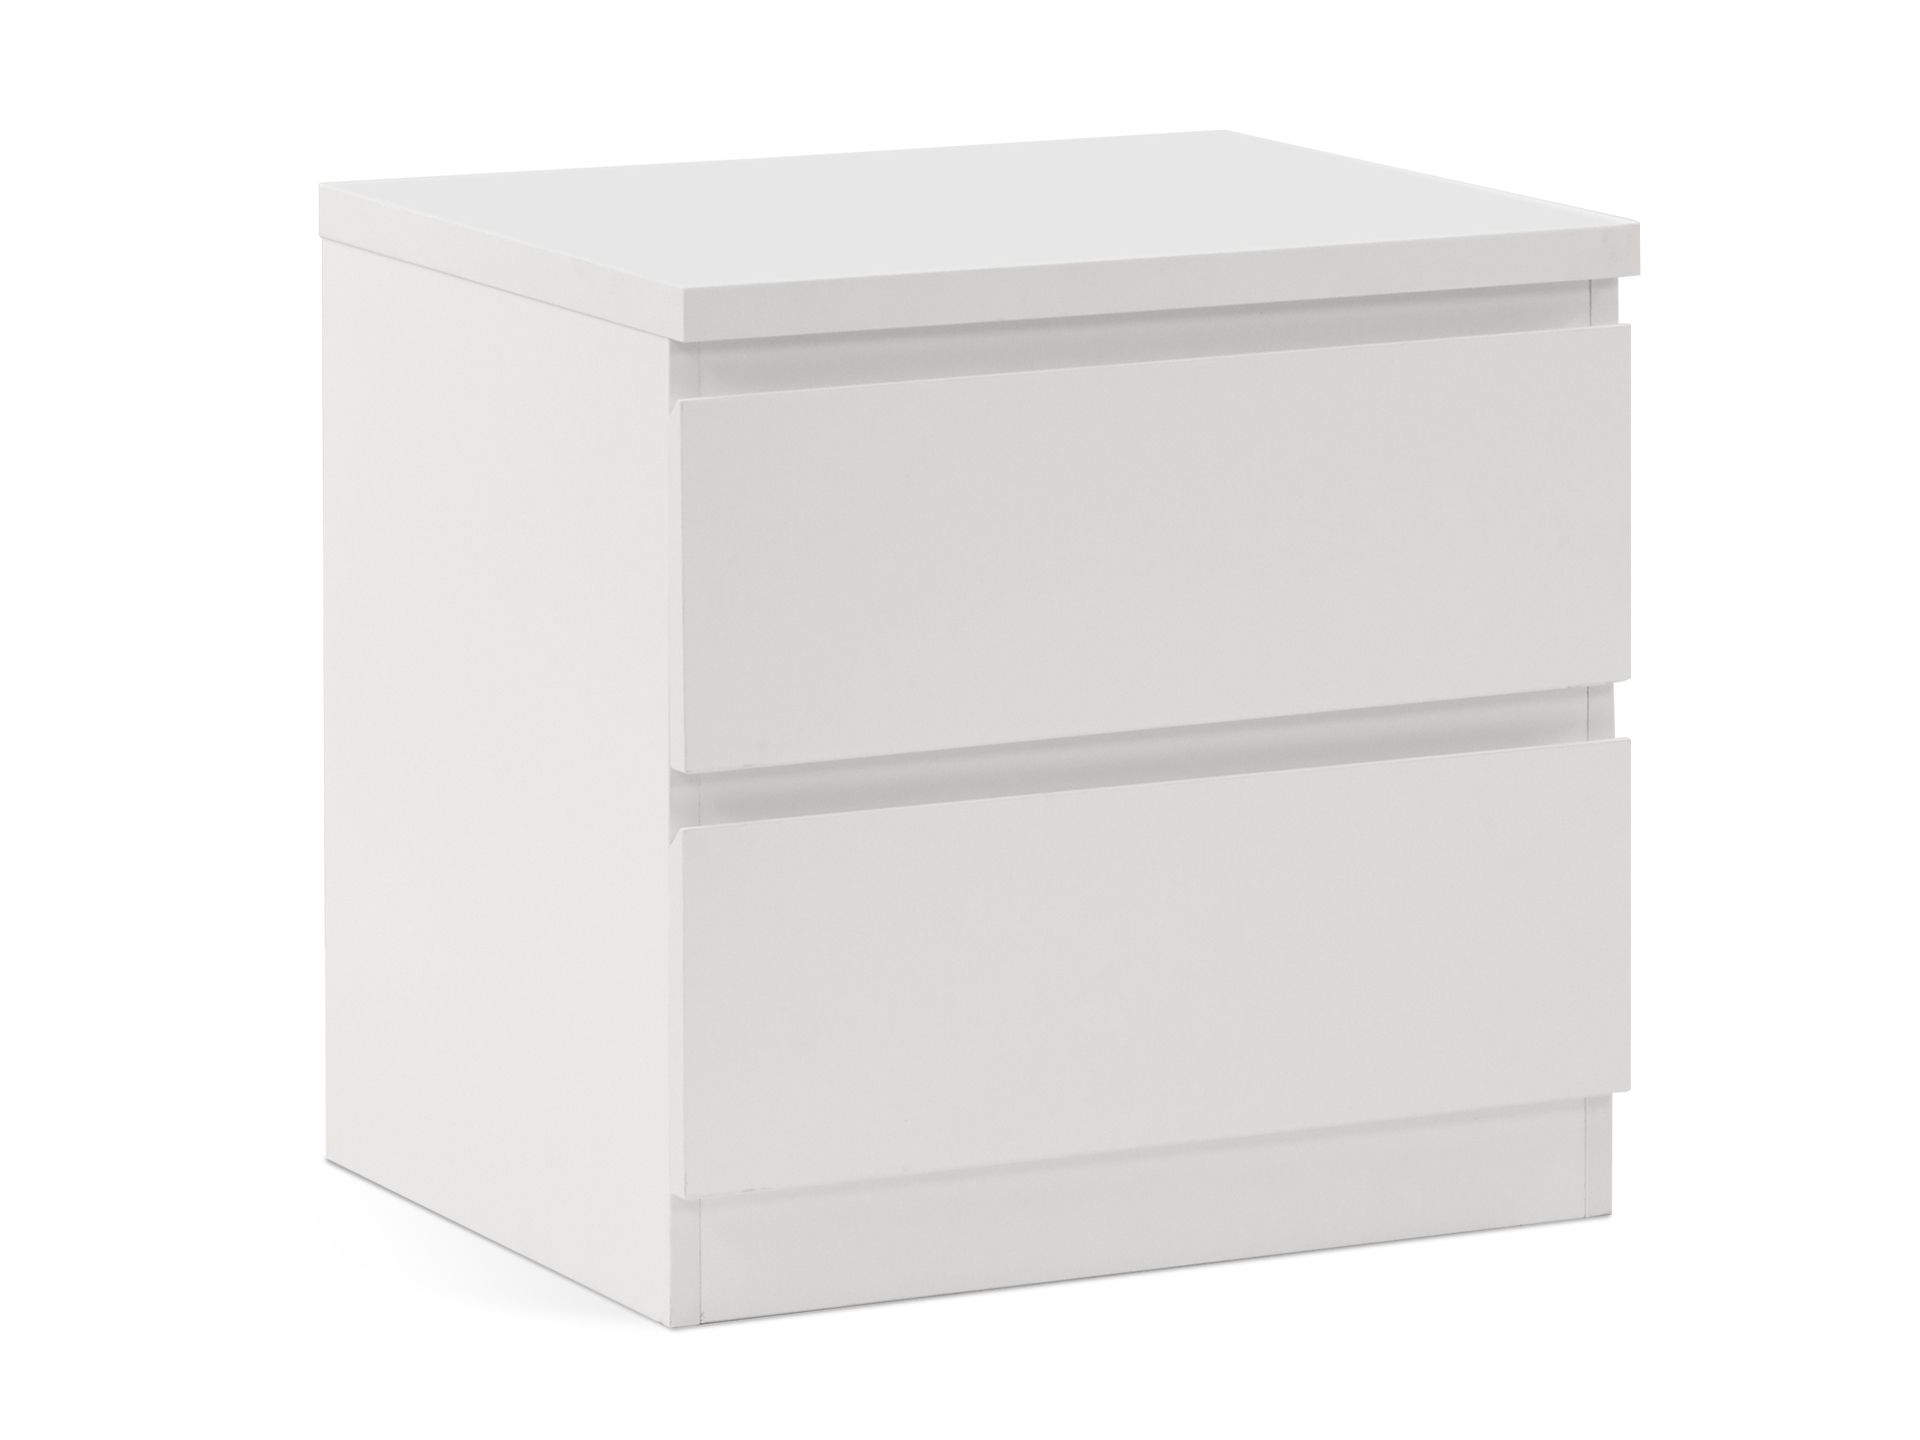 Tongass Wooden Bedside Table - White